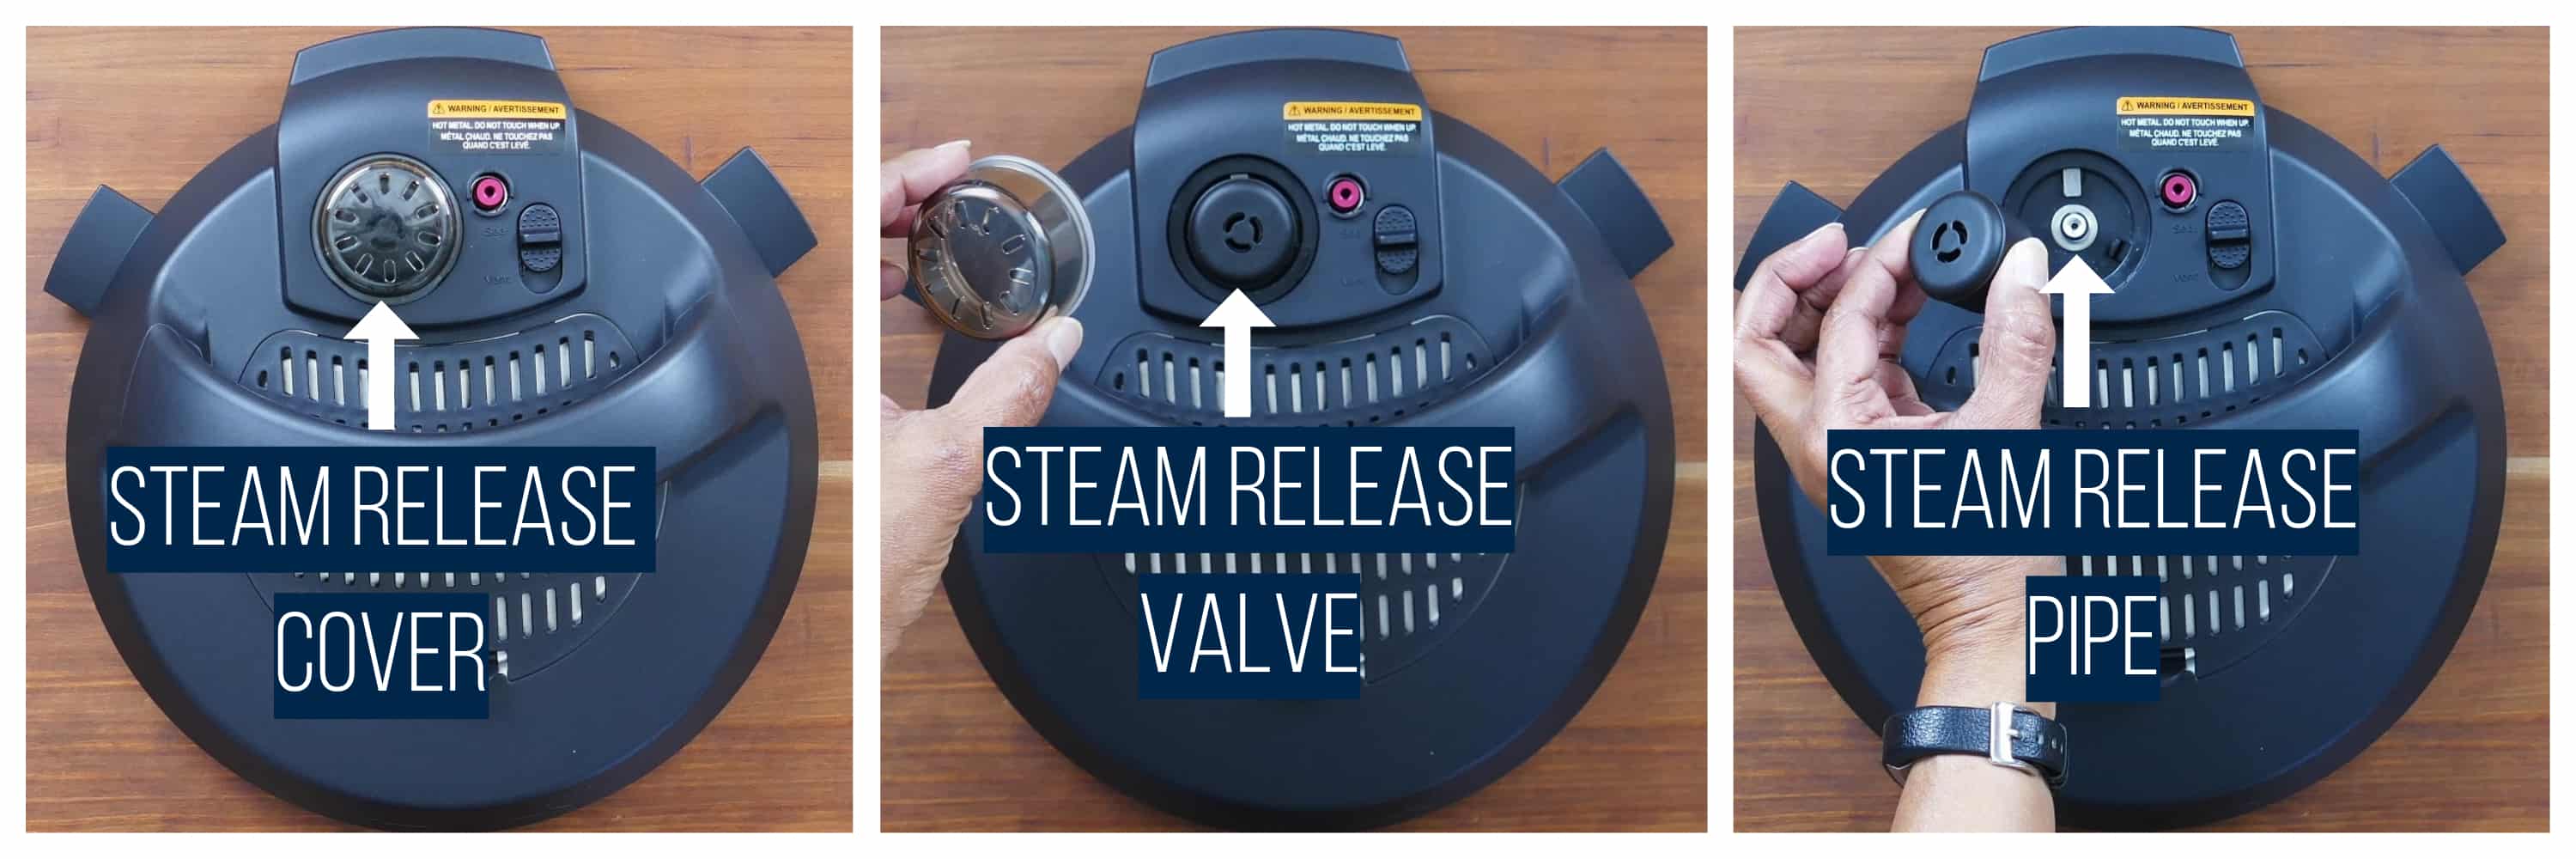 Instant Pot Pro collage - steam release cover, removed, steam release valve, removed, steam release pipe - Paint the Kitchen Red